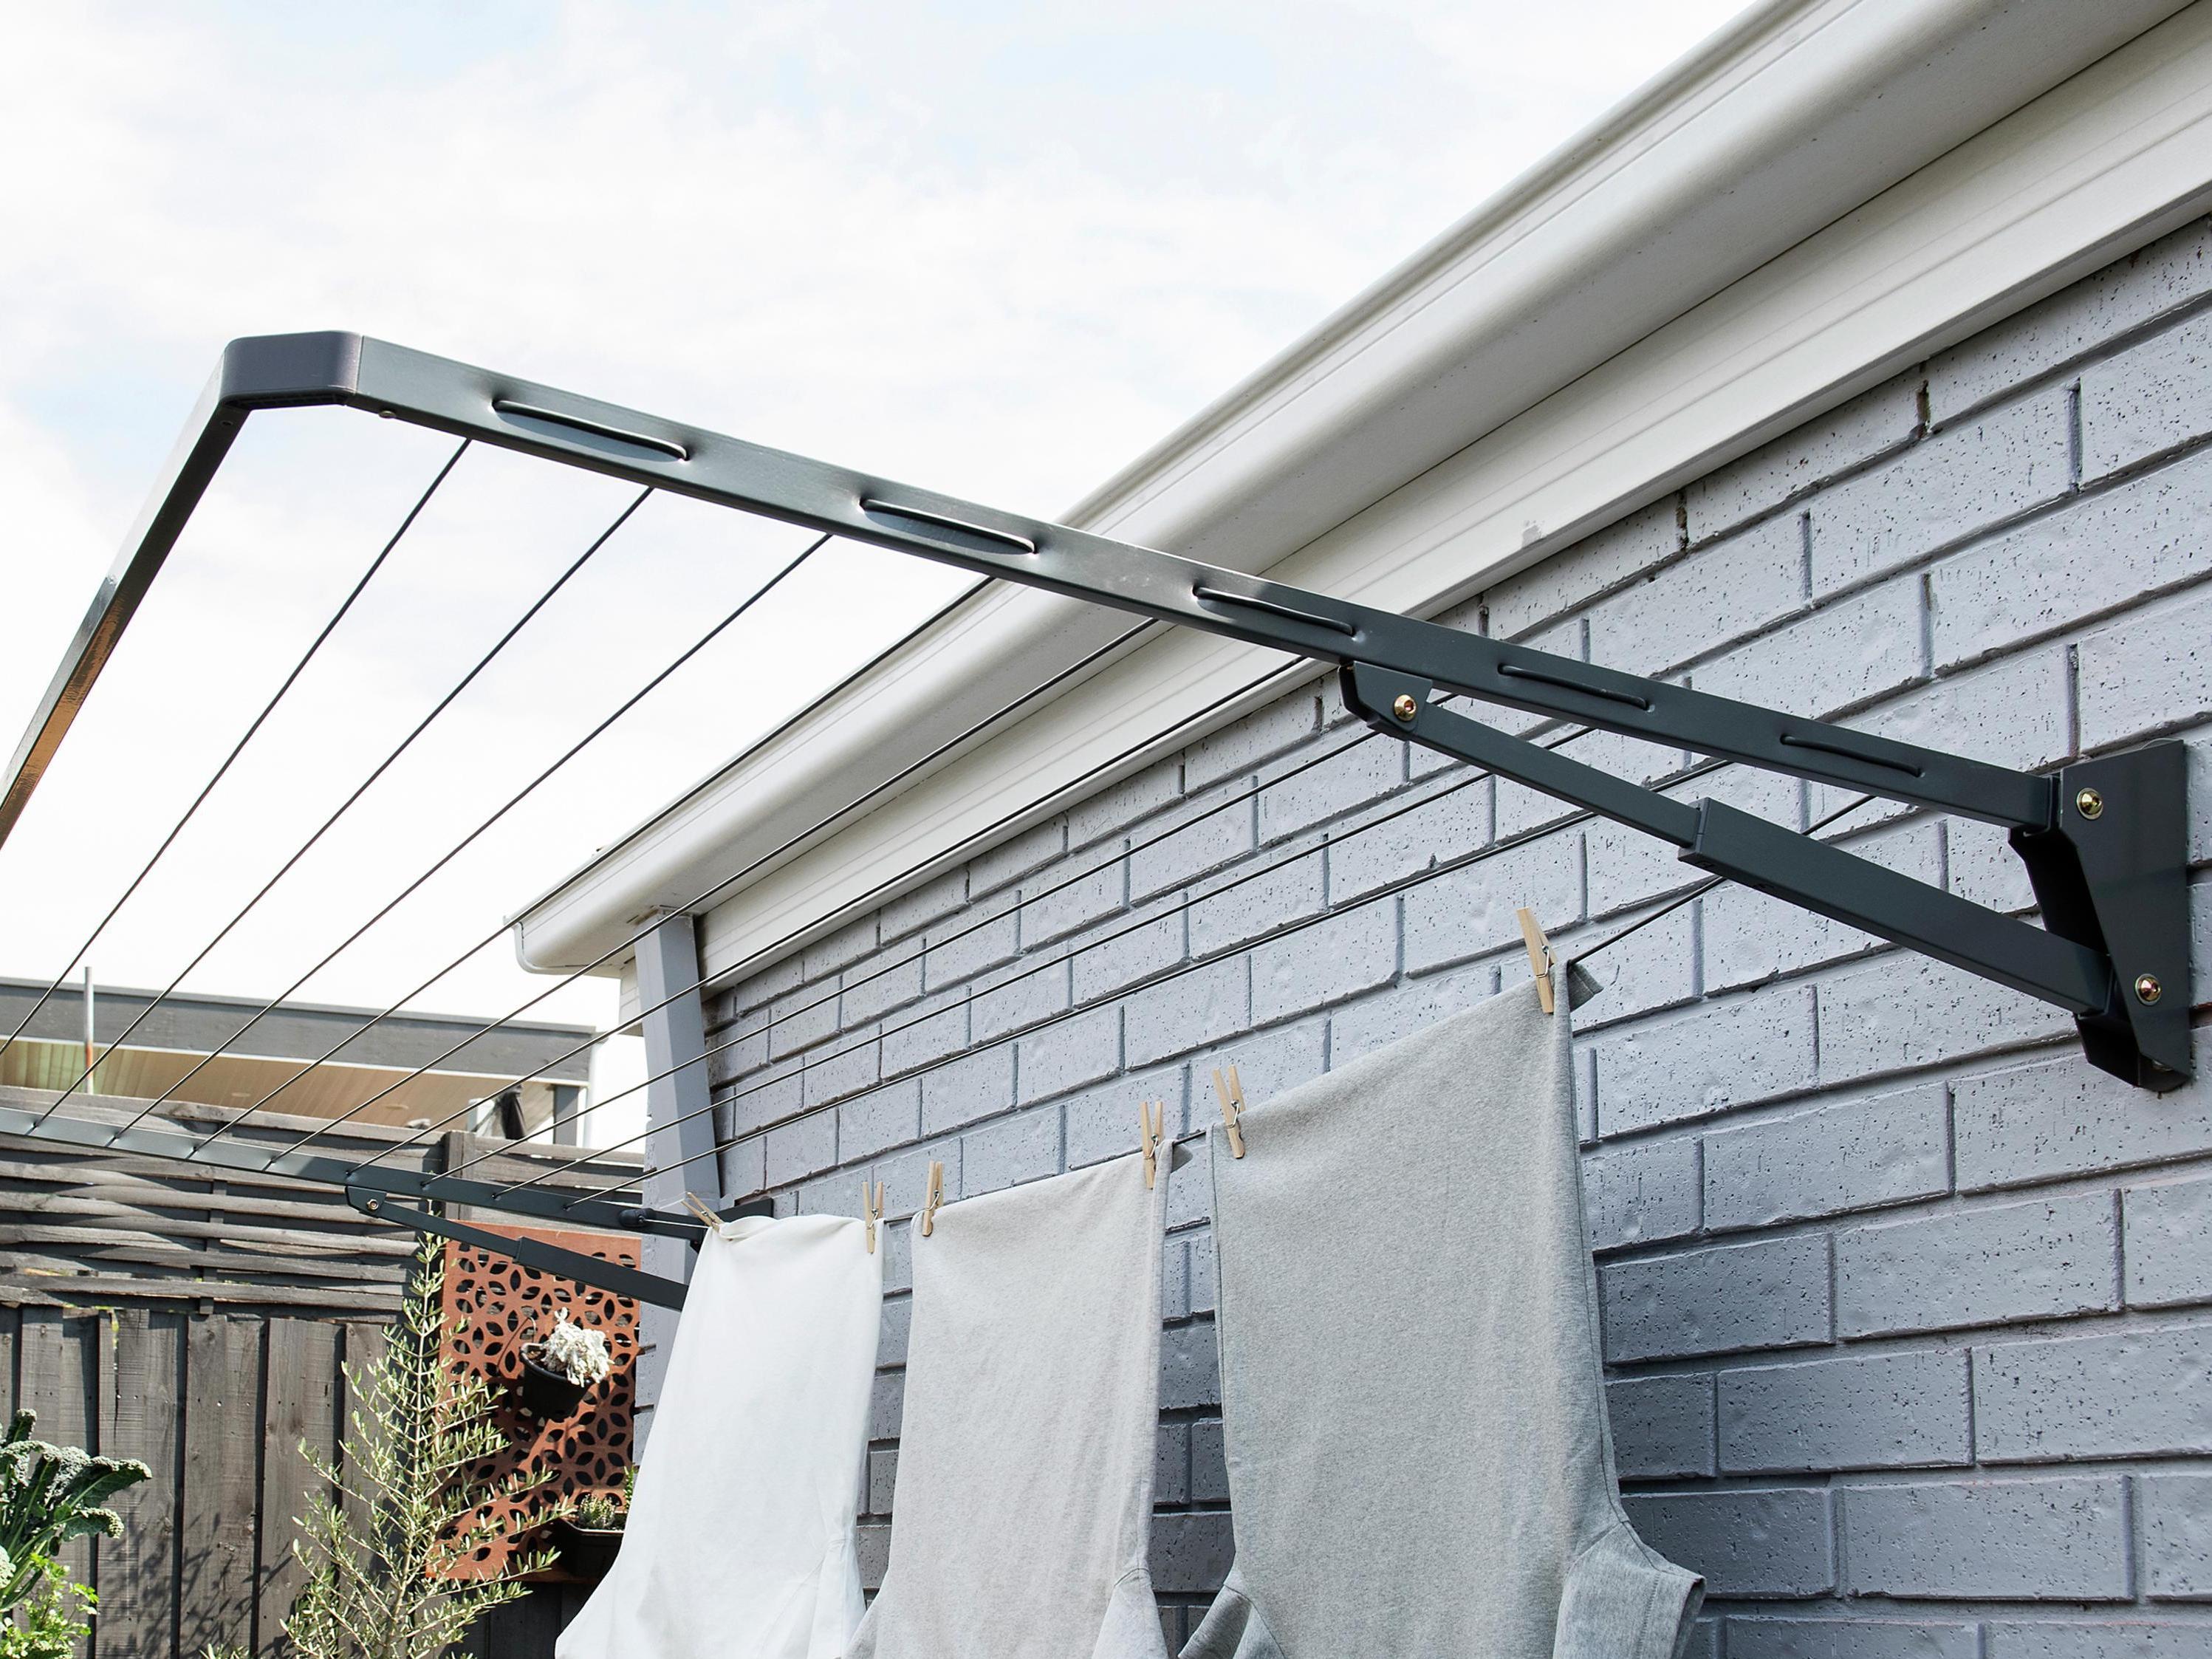 How To Install a Wall-Mounted Clothesline - Bunnings Australia